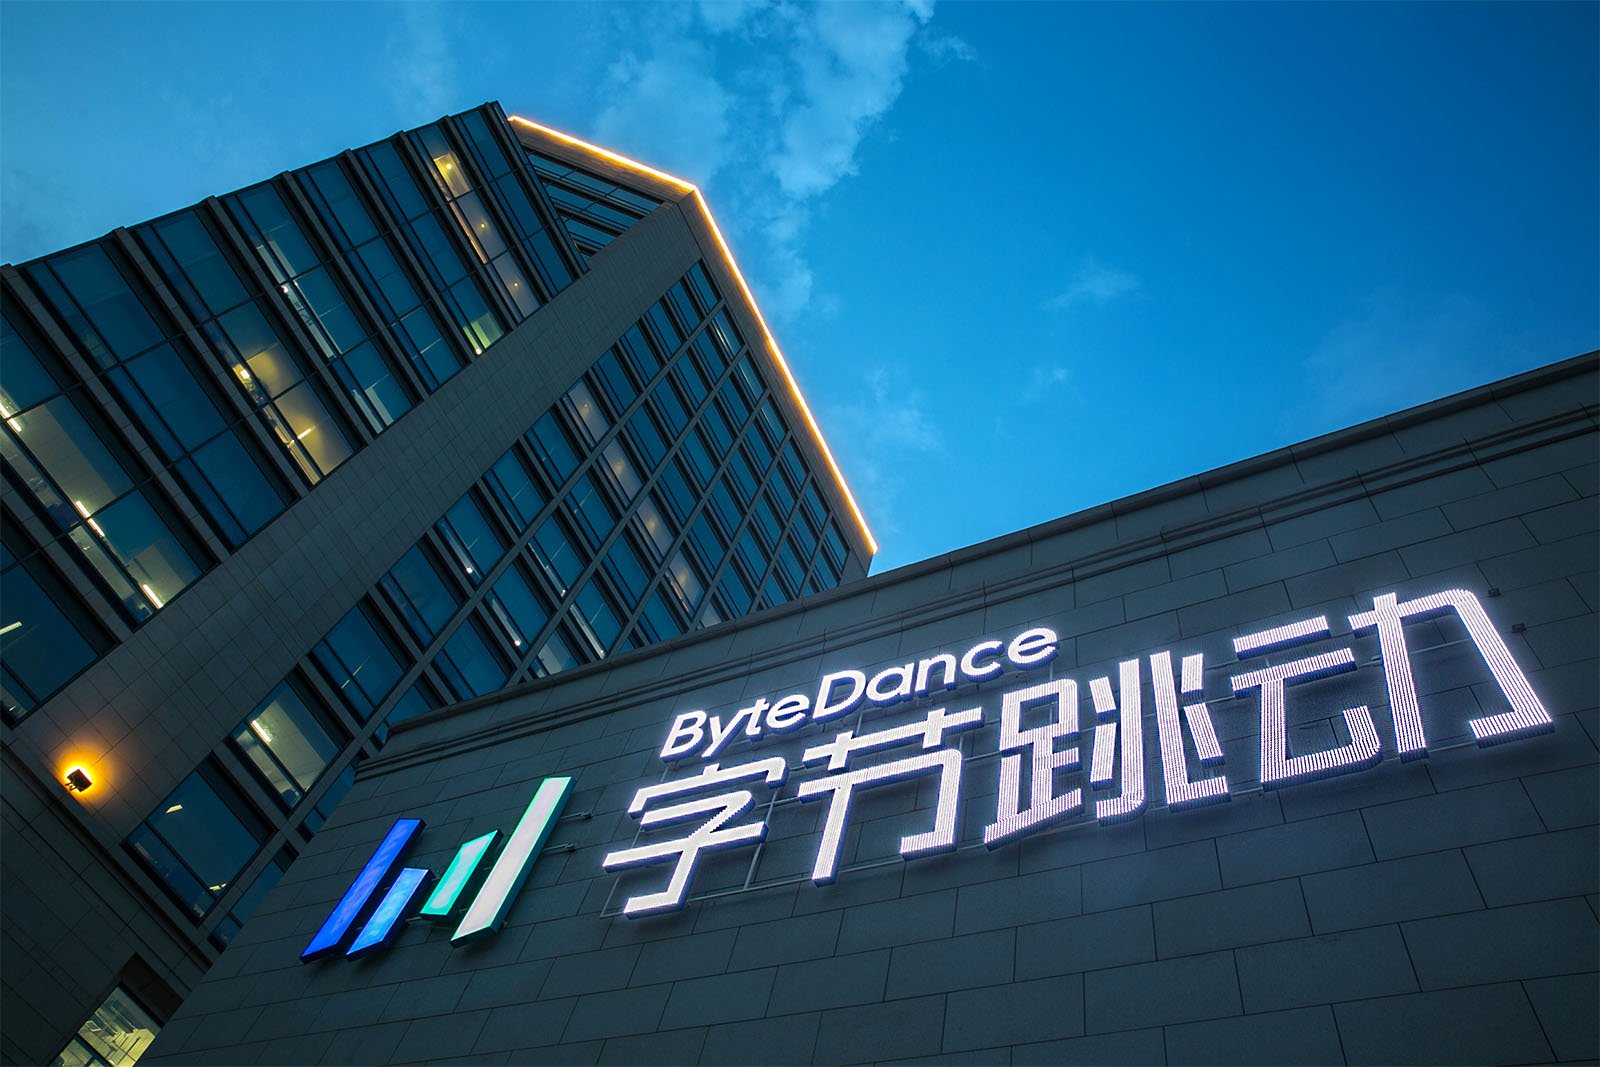 The exterior of a bytedance office building at twilight, featuring the company's logo illuminated in blue and white lights on a modern facade.